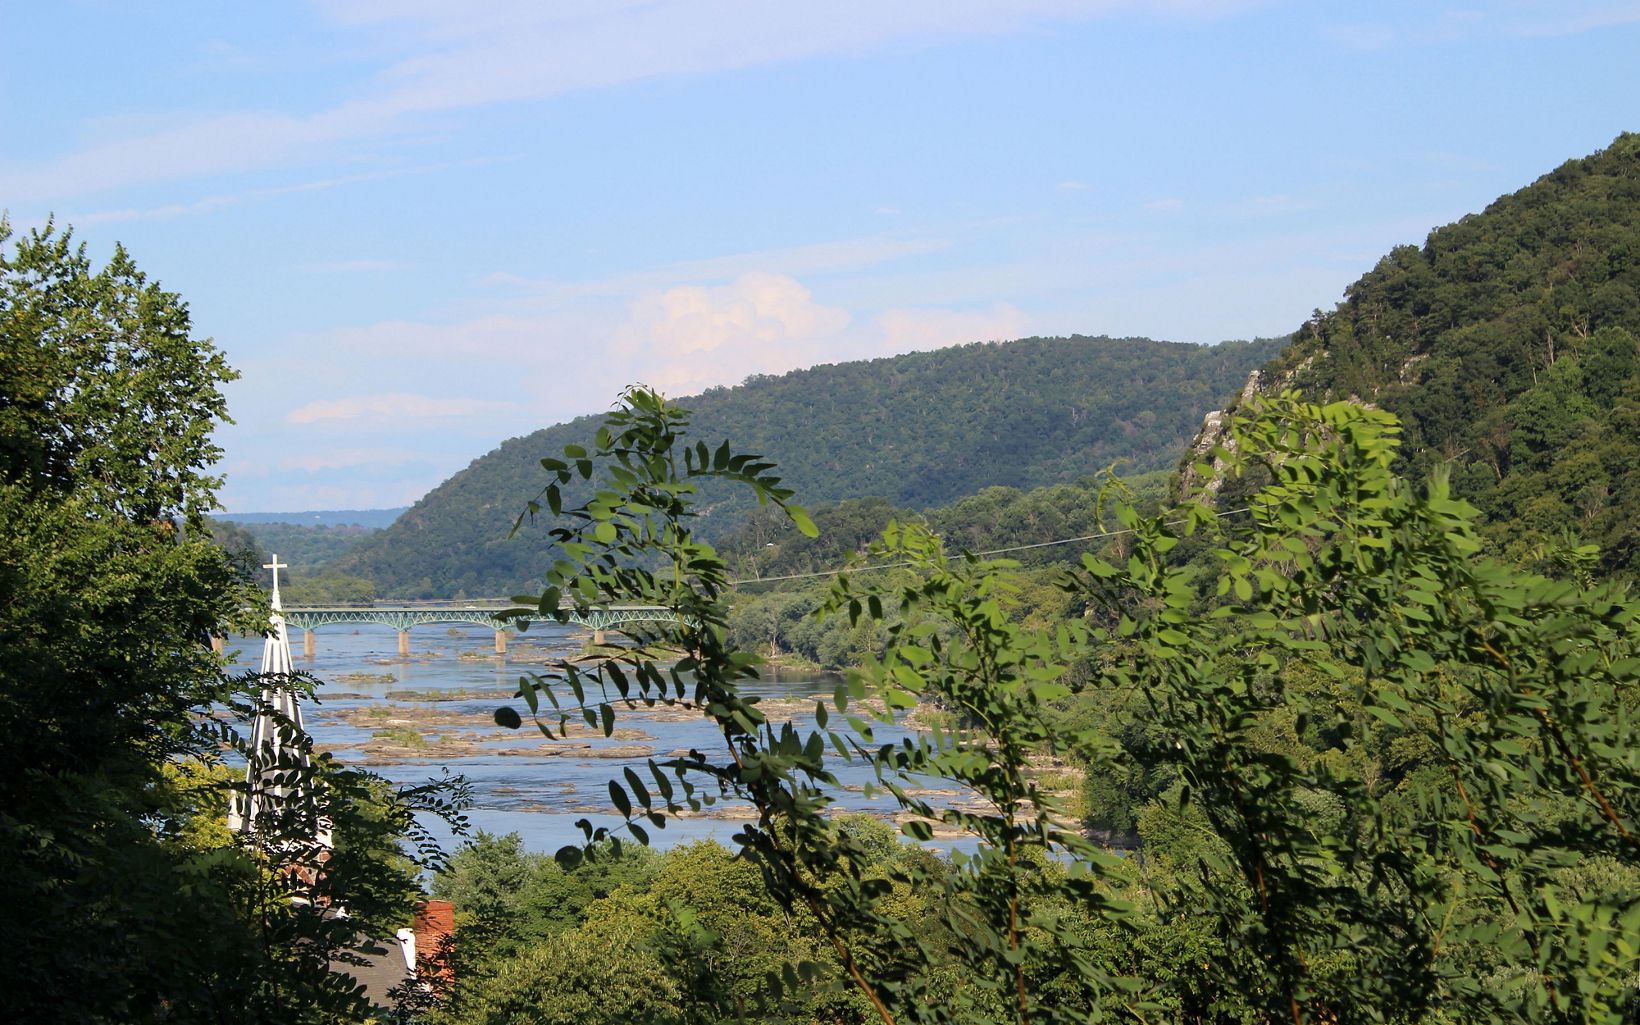 View through tree branches of the Potomac River as it winds between green mountains and the town of Harpers Ferry.